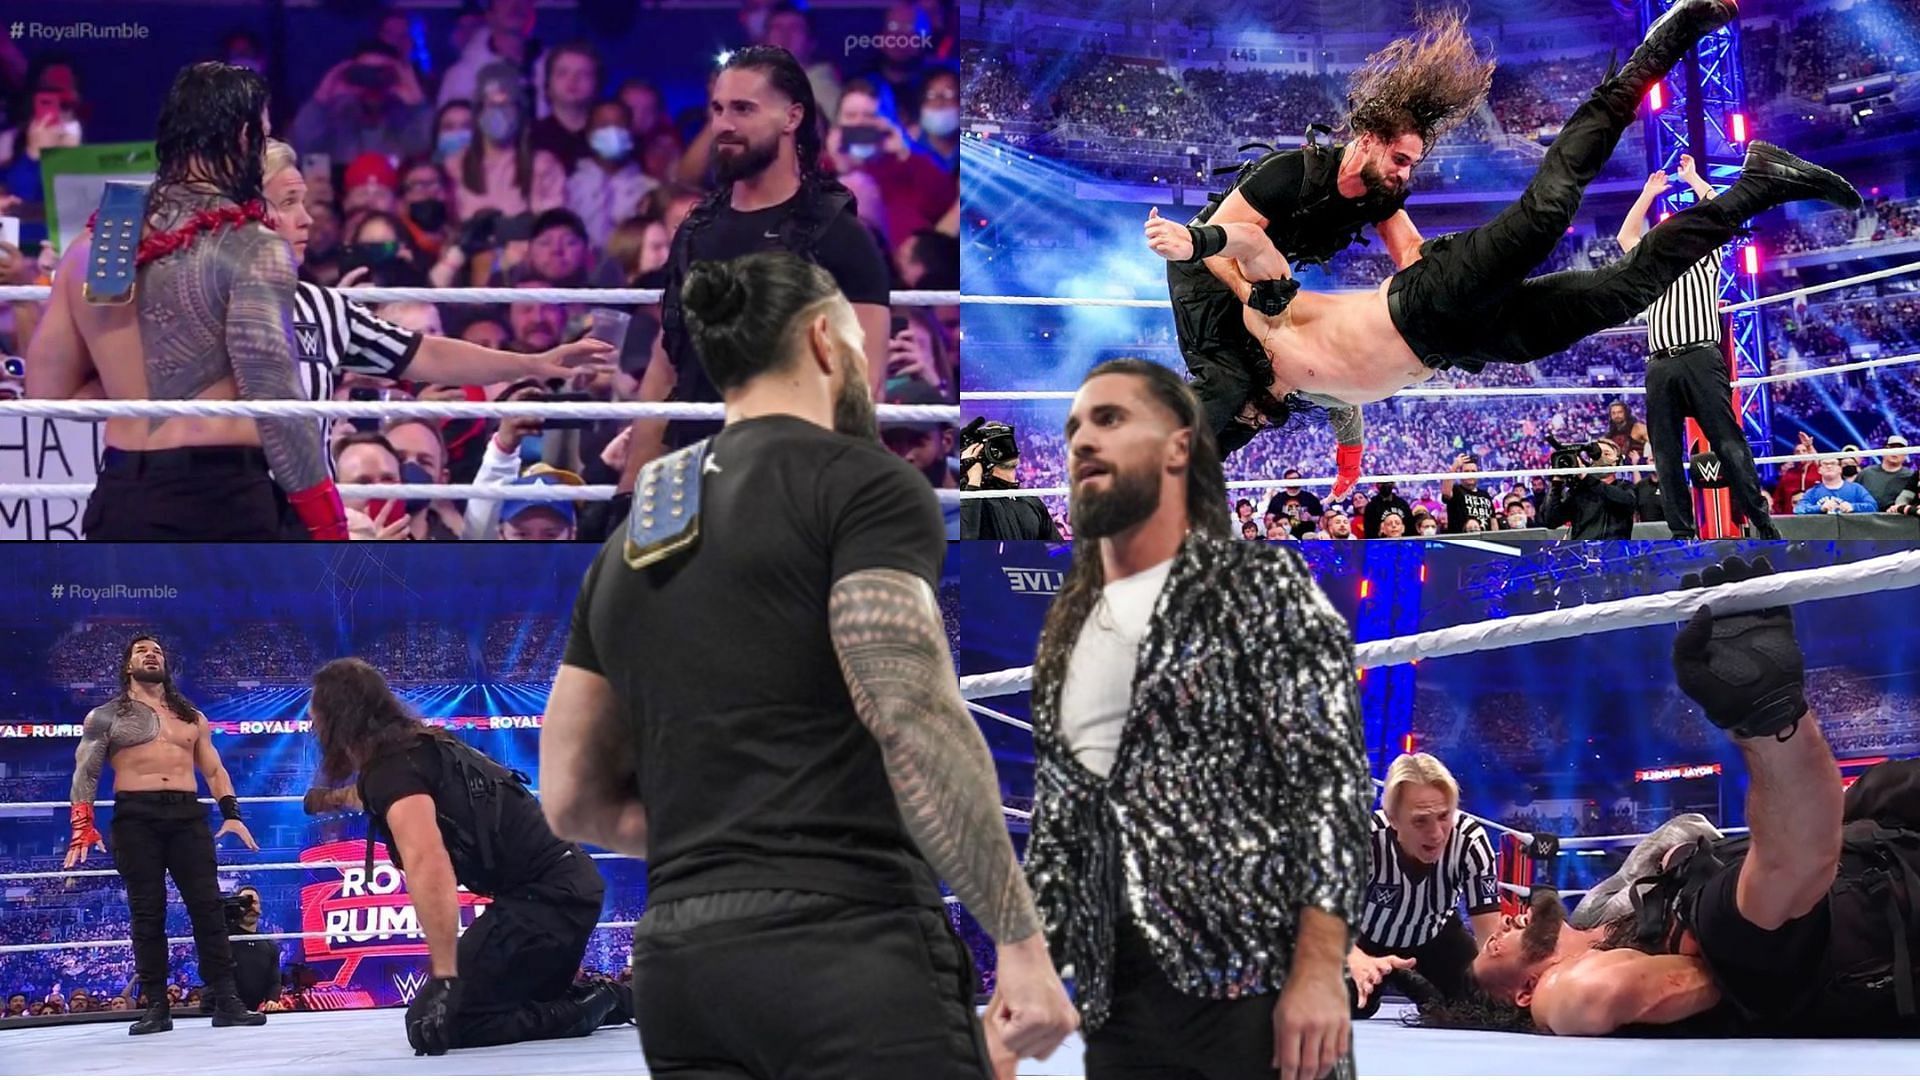 Roman Reigns vs. Seth Rollins at Royal Rumble 2022 was a masterclass in storytelling